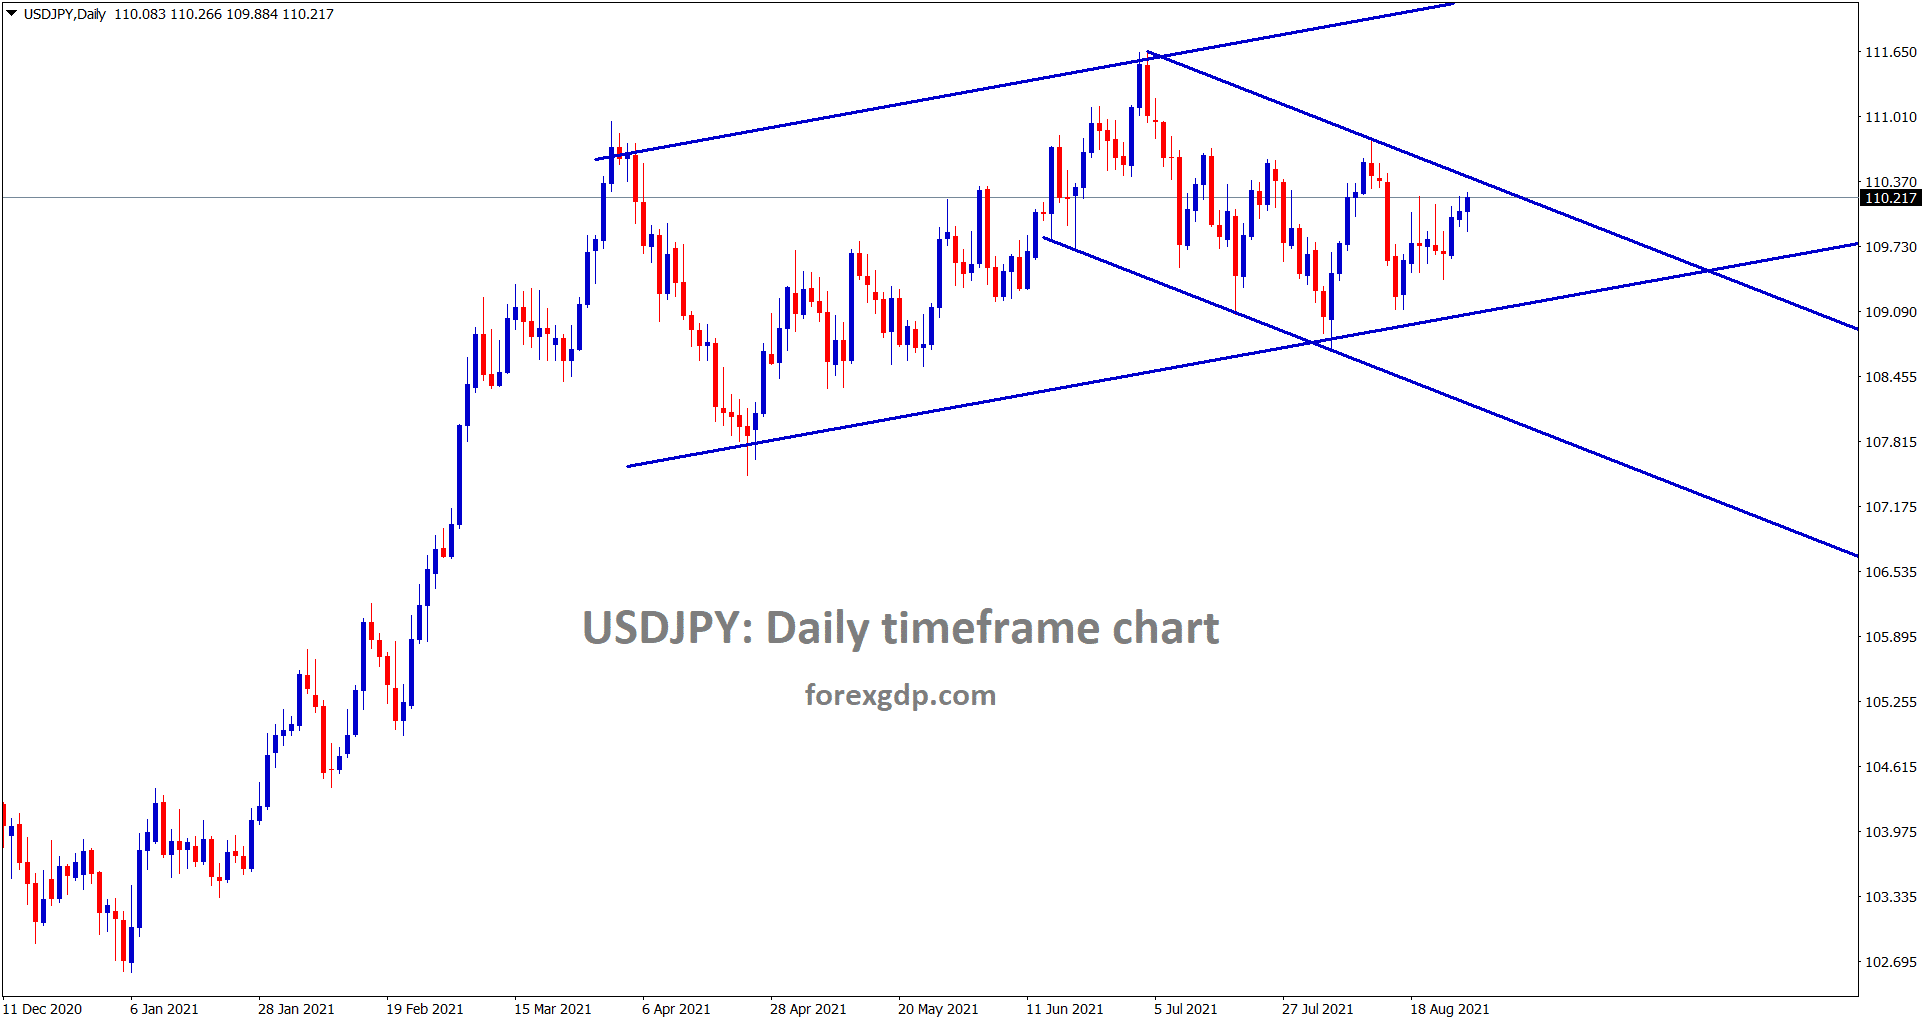 USDJPY is near to the lower high of the minor descending channel